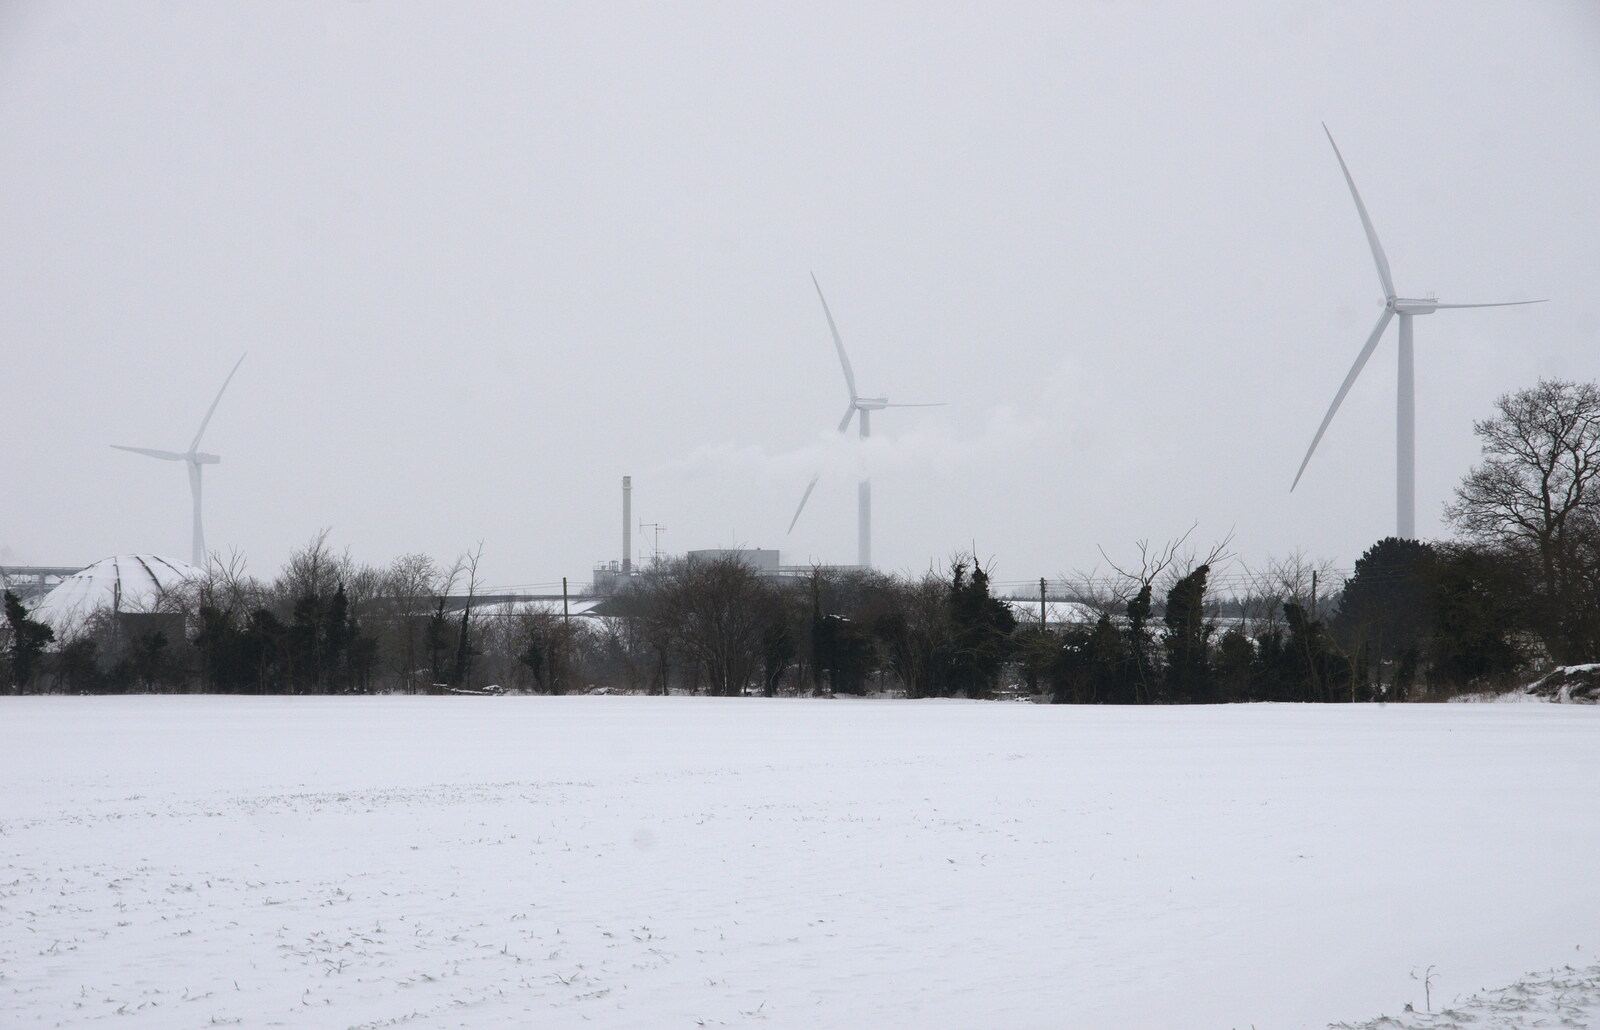 The wind turbines of Eye Airfield from More March Snow and a Postcard from Diss, Norfolk - 3rd March 2018